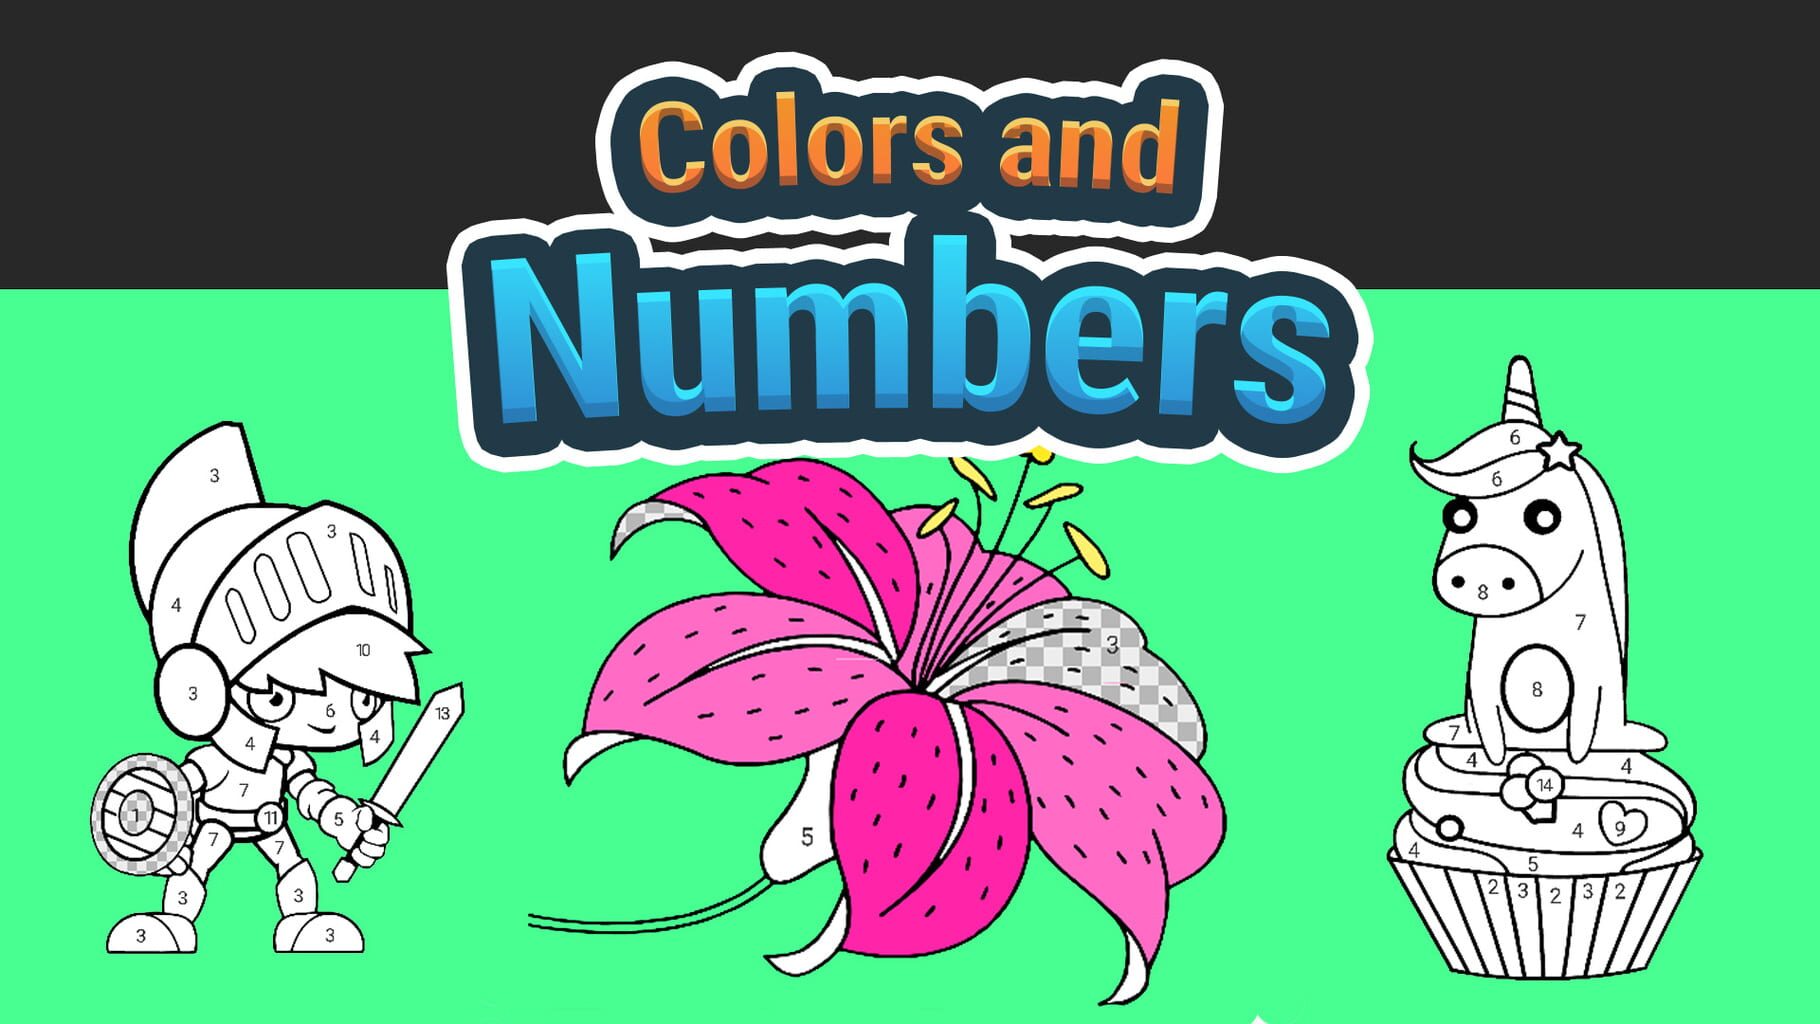 Colors and Numbers artwork